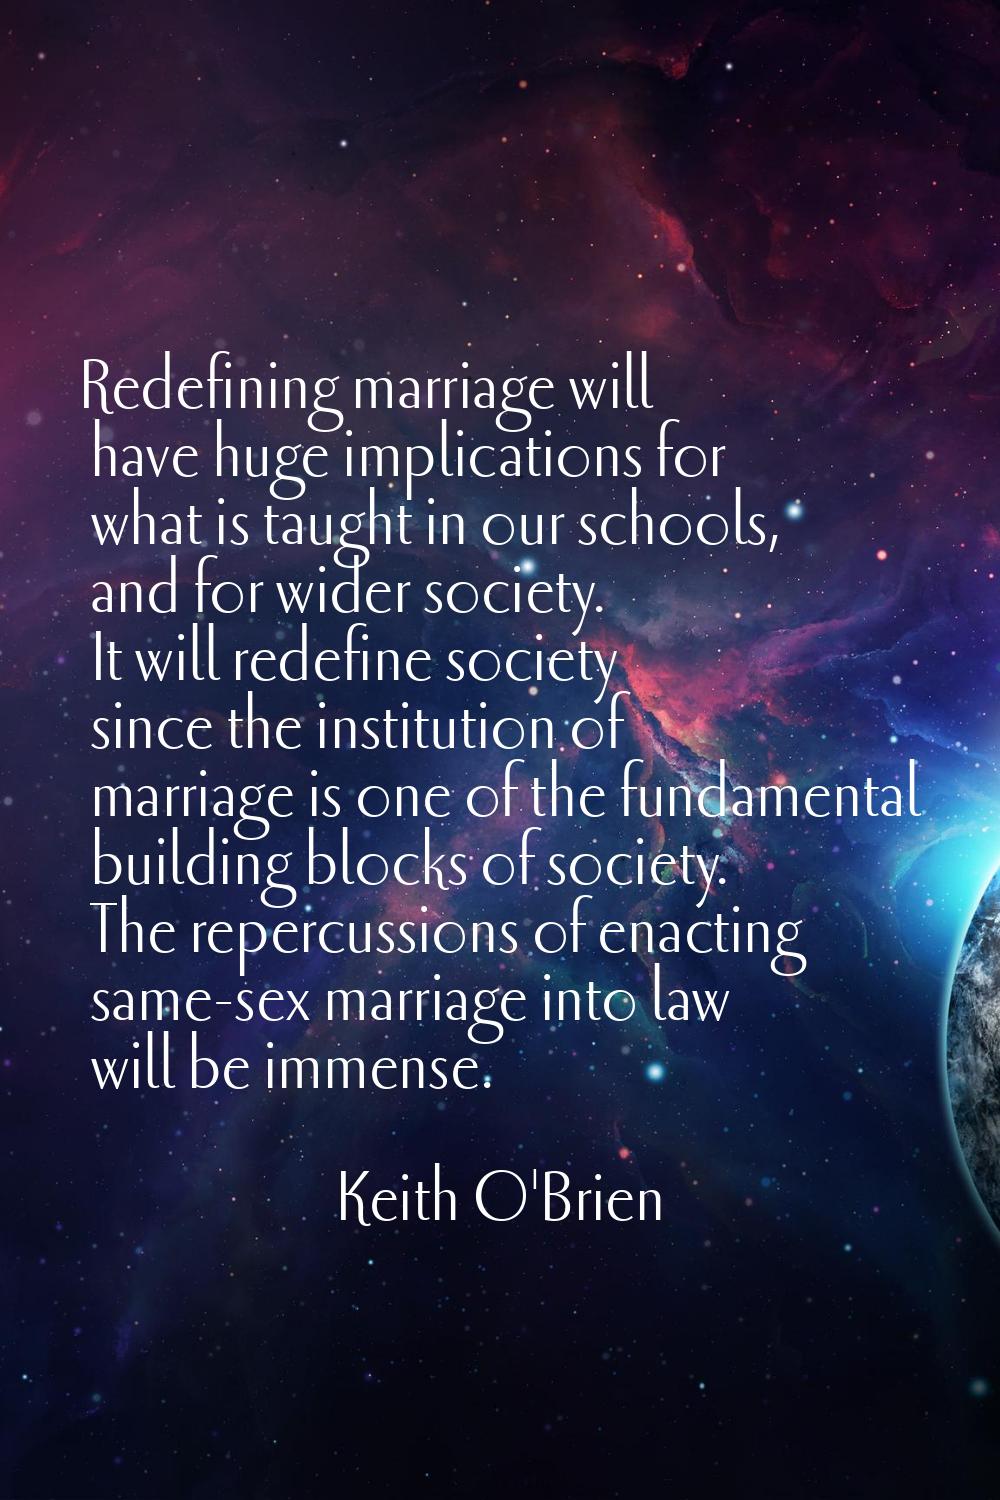 Redefining marriage will have huge implications for what is taught in our schools, and for wider so